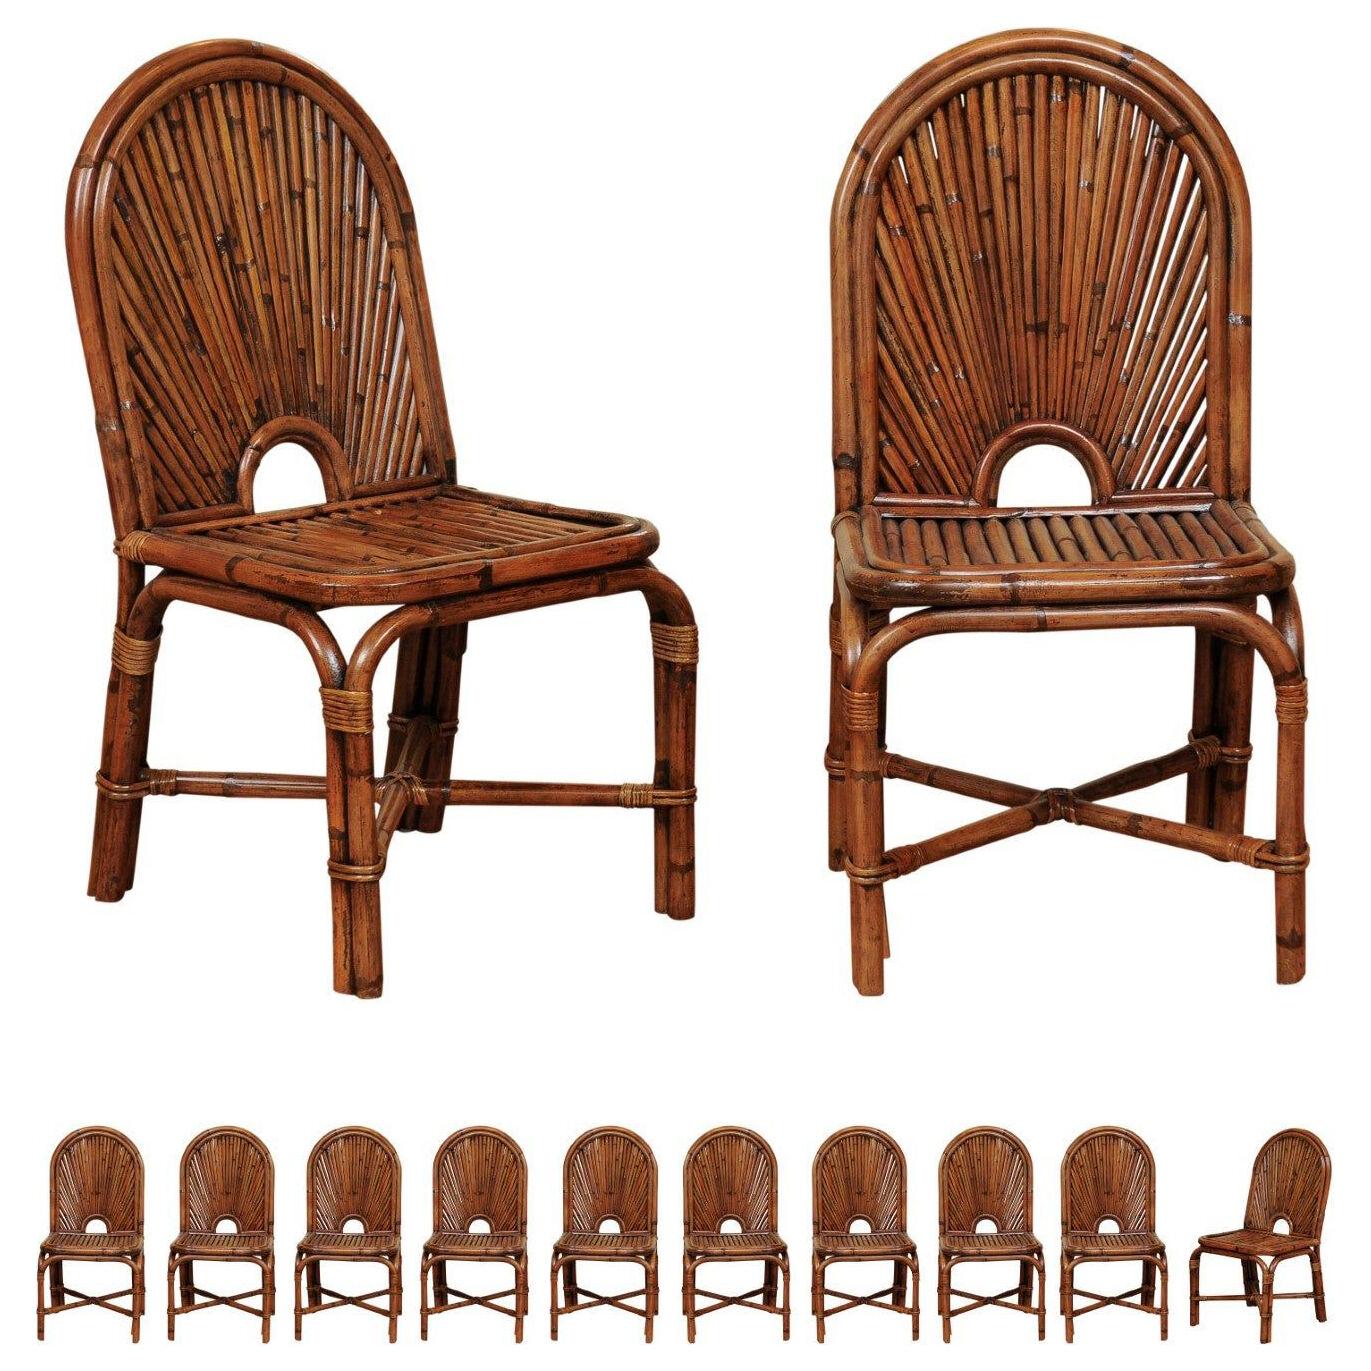 Spectacular Restored Set of 12 Rattan and Bamboo Dining Chairs, circa 1975